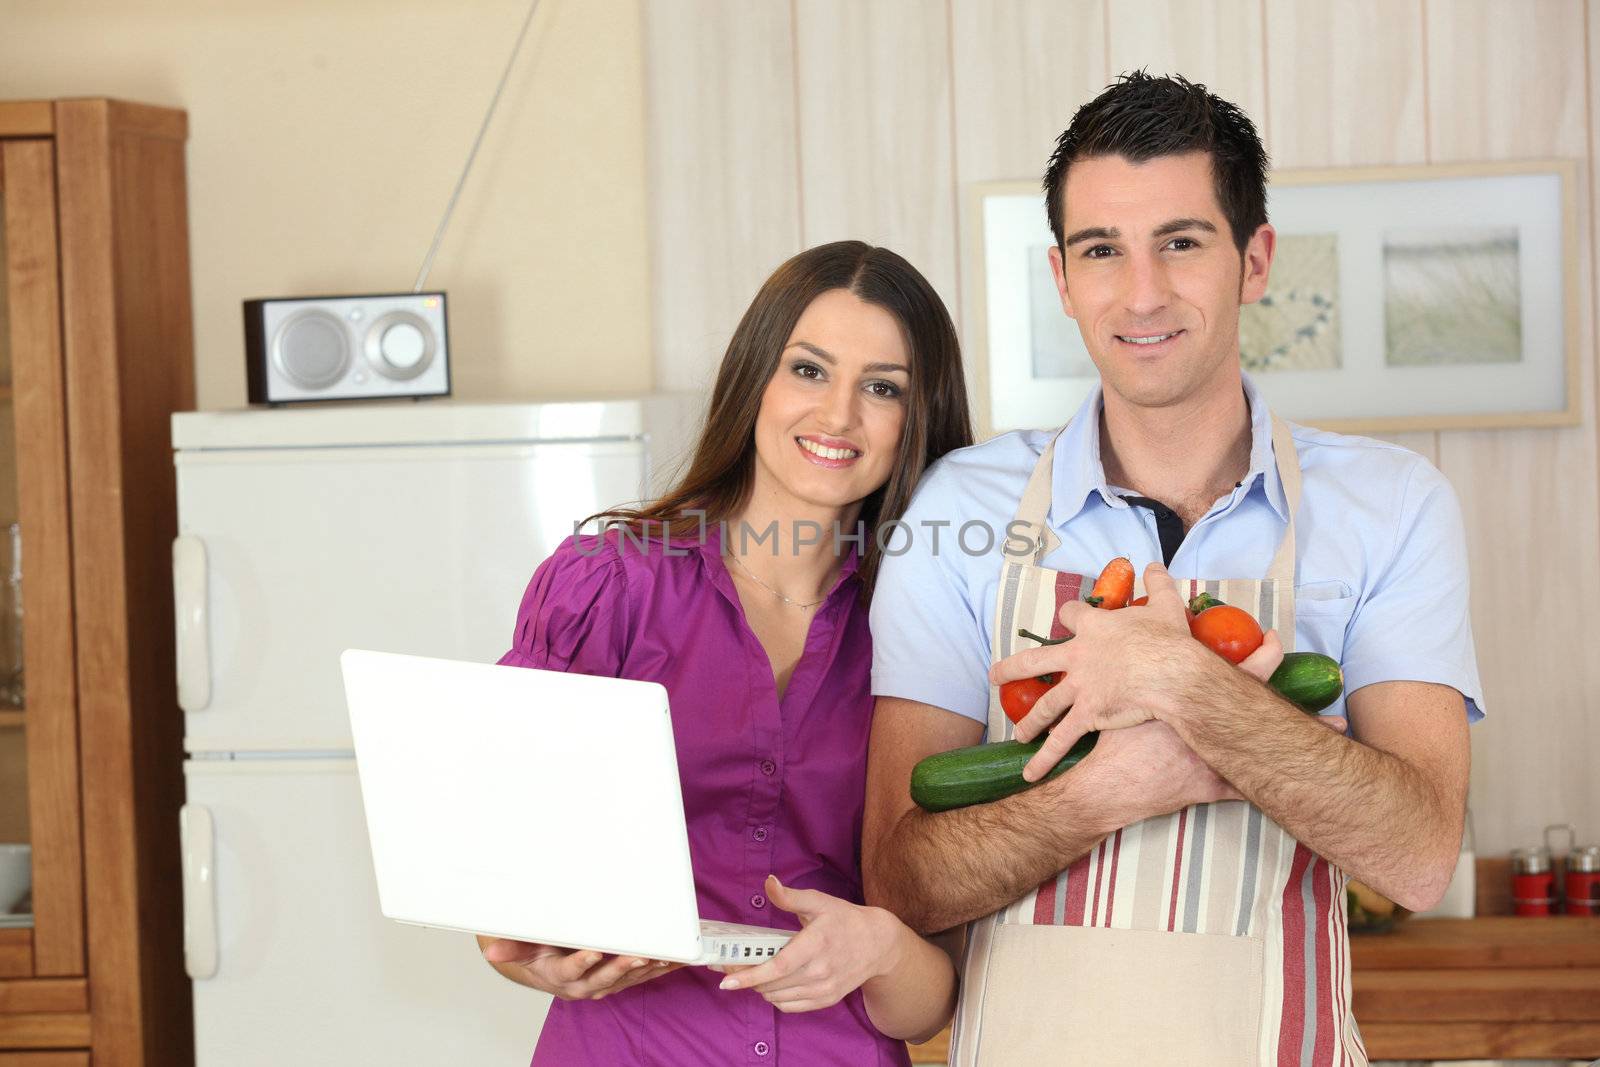 Couple in a kitchen with a laptop computer and arms full of vegetables by phovoir